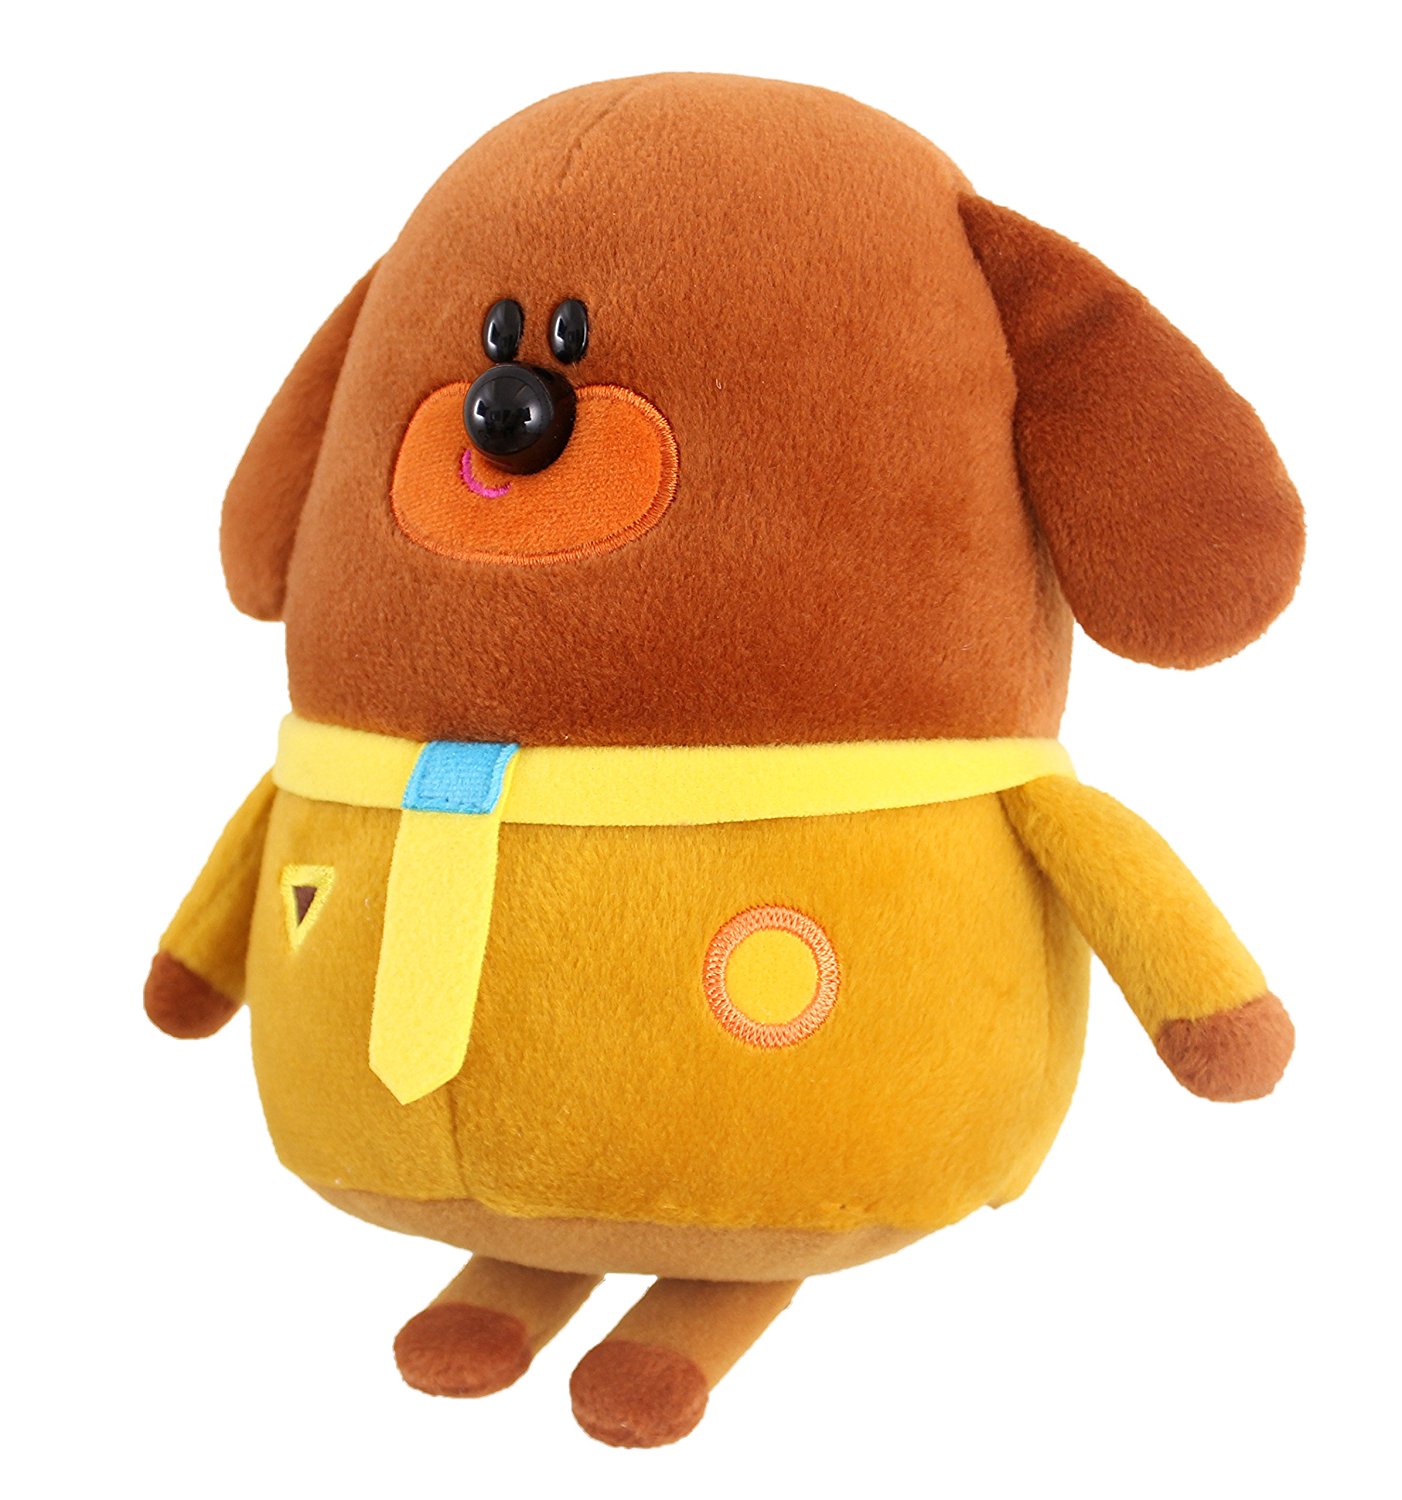 Hey Duggee Soft Toy: Amazon.co.uk: Toys & Games